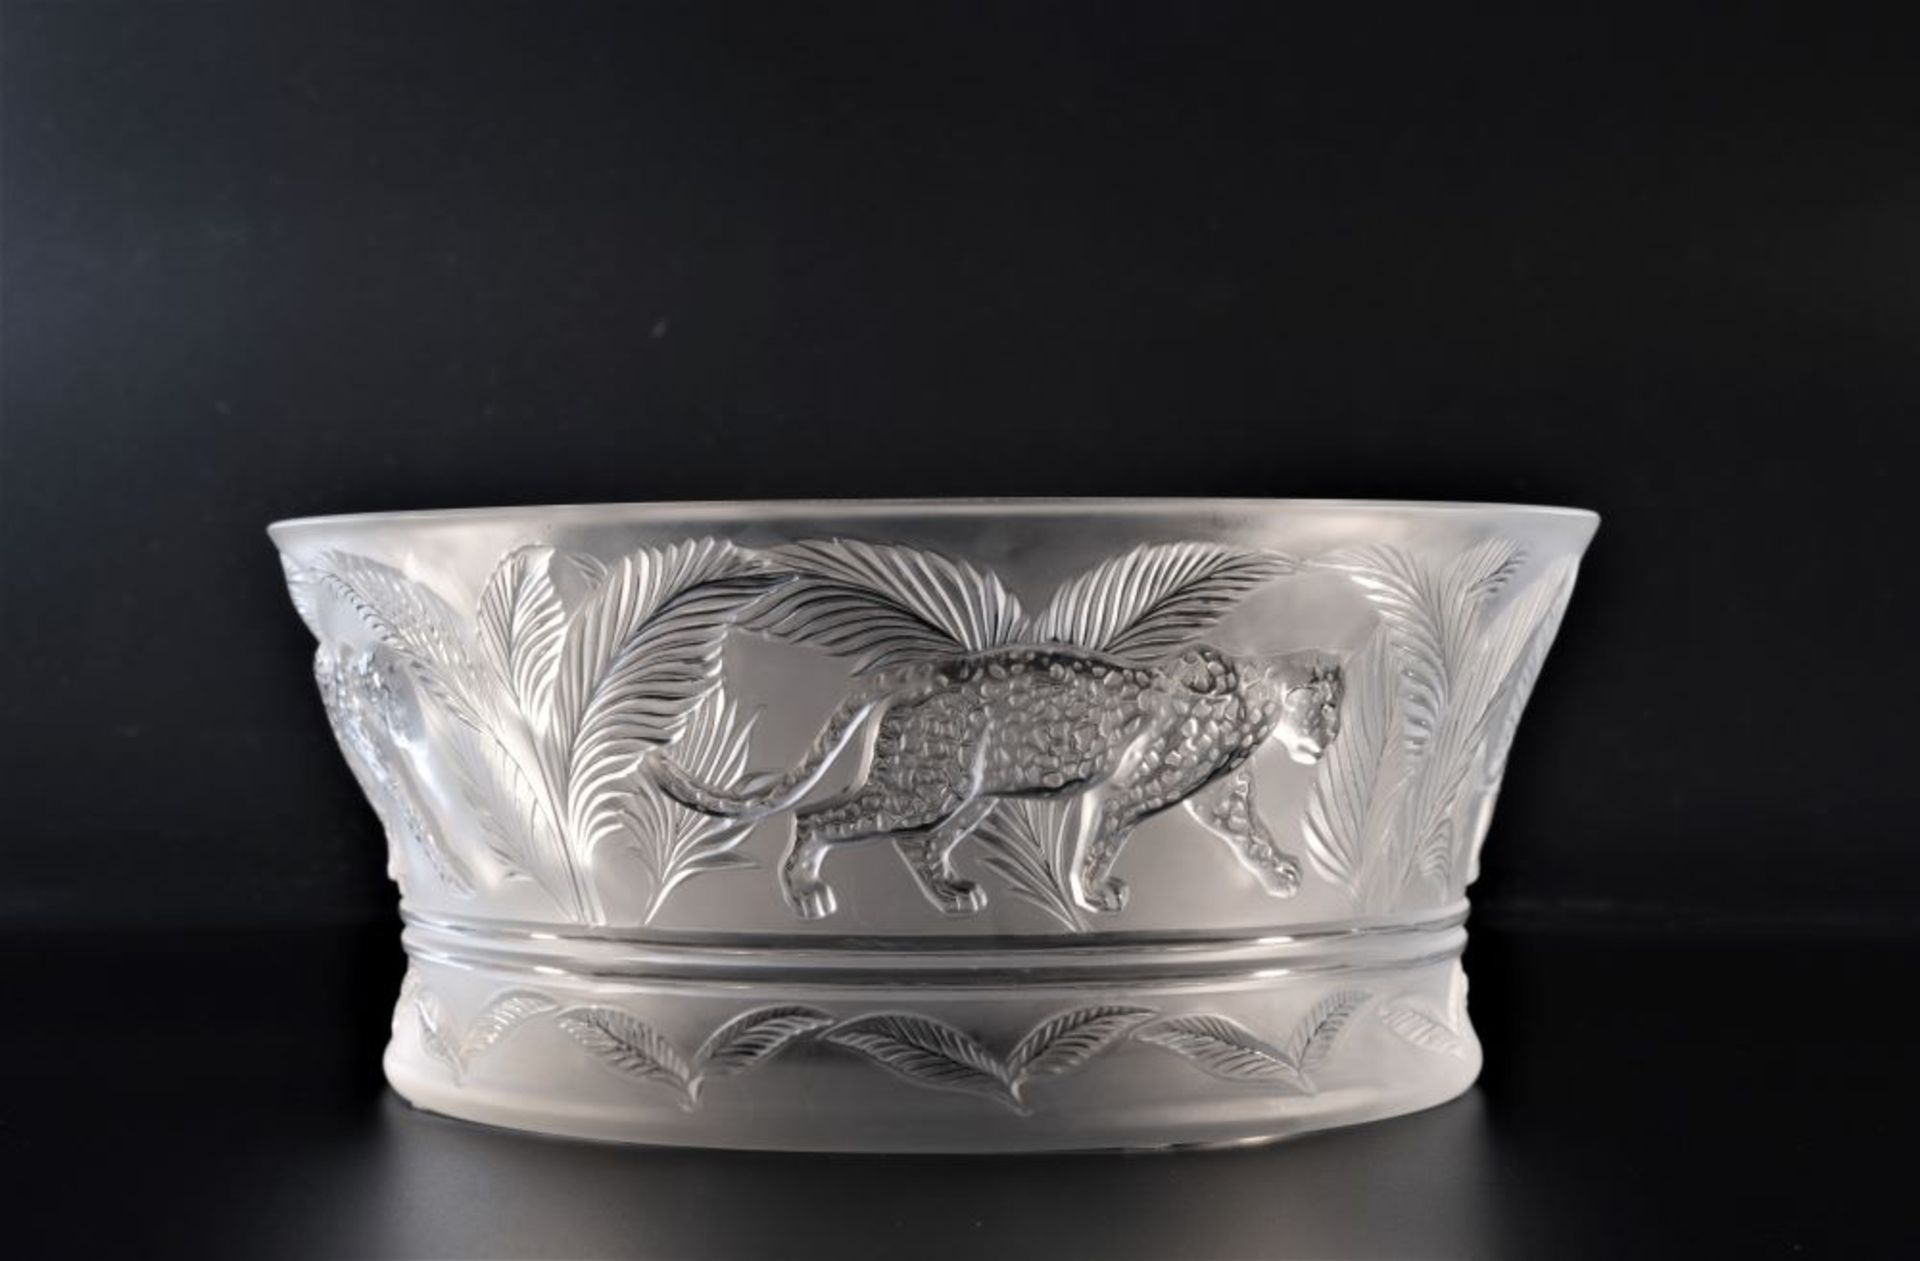 A LALIQUE Jungle Bowl in Clear Satin-Finished Crystal depicting the density of a Tropical Rainforest